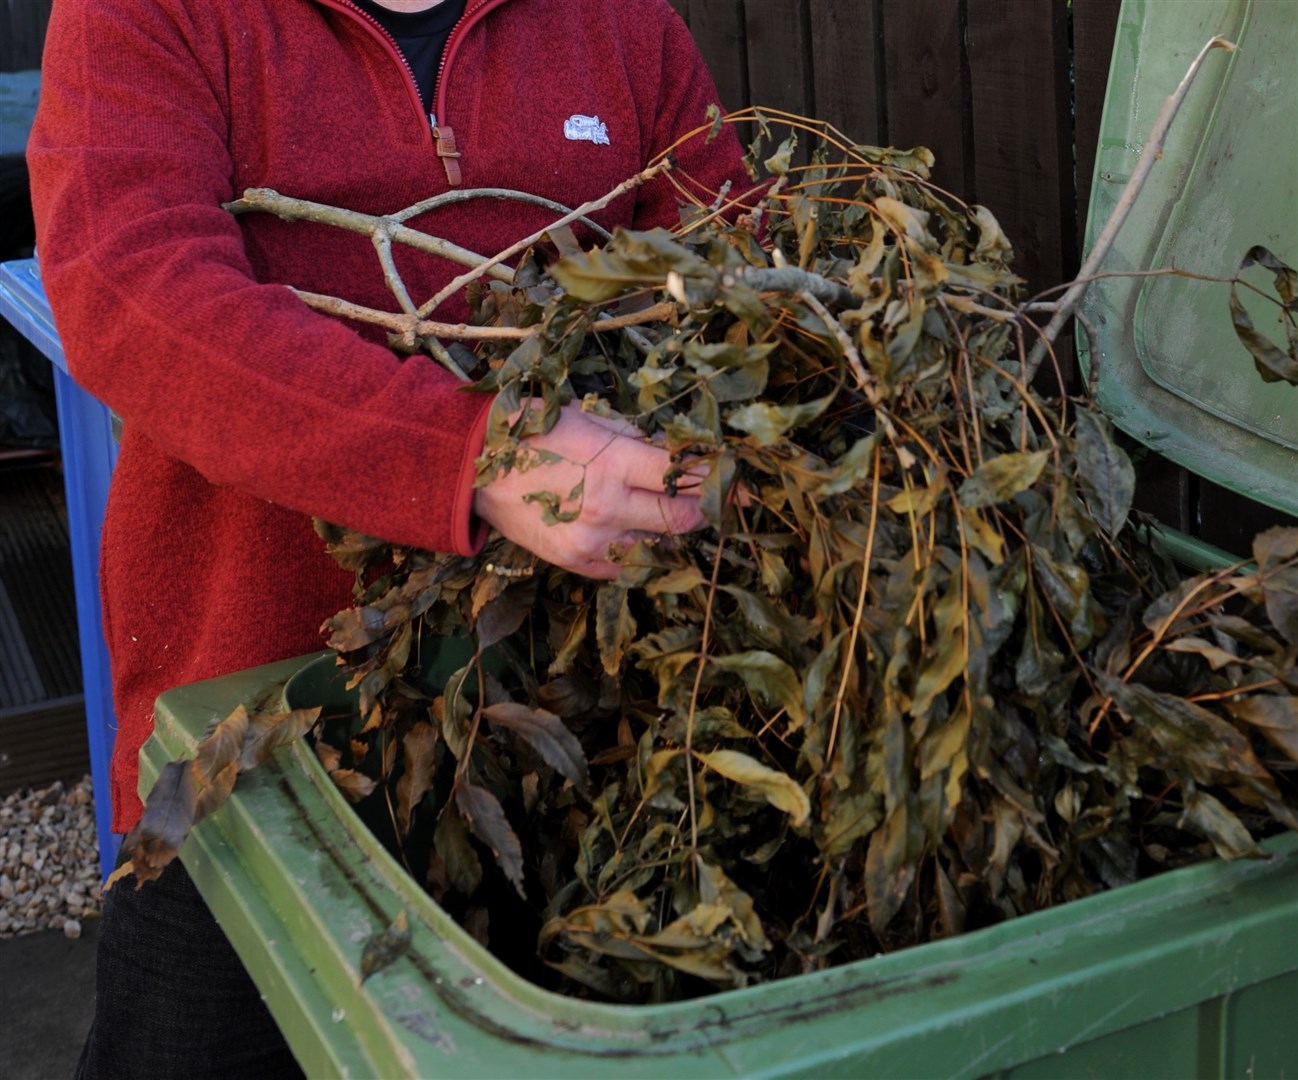 Garden waste bin collections will begin again on May 11.